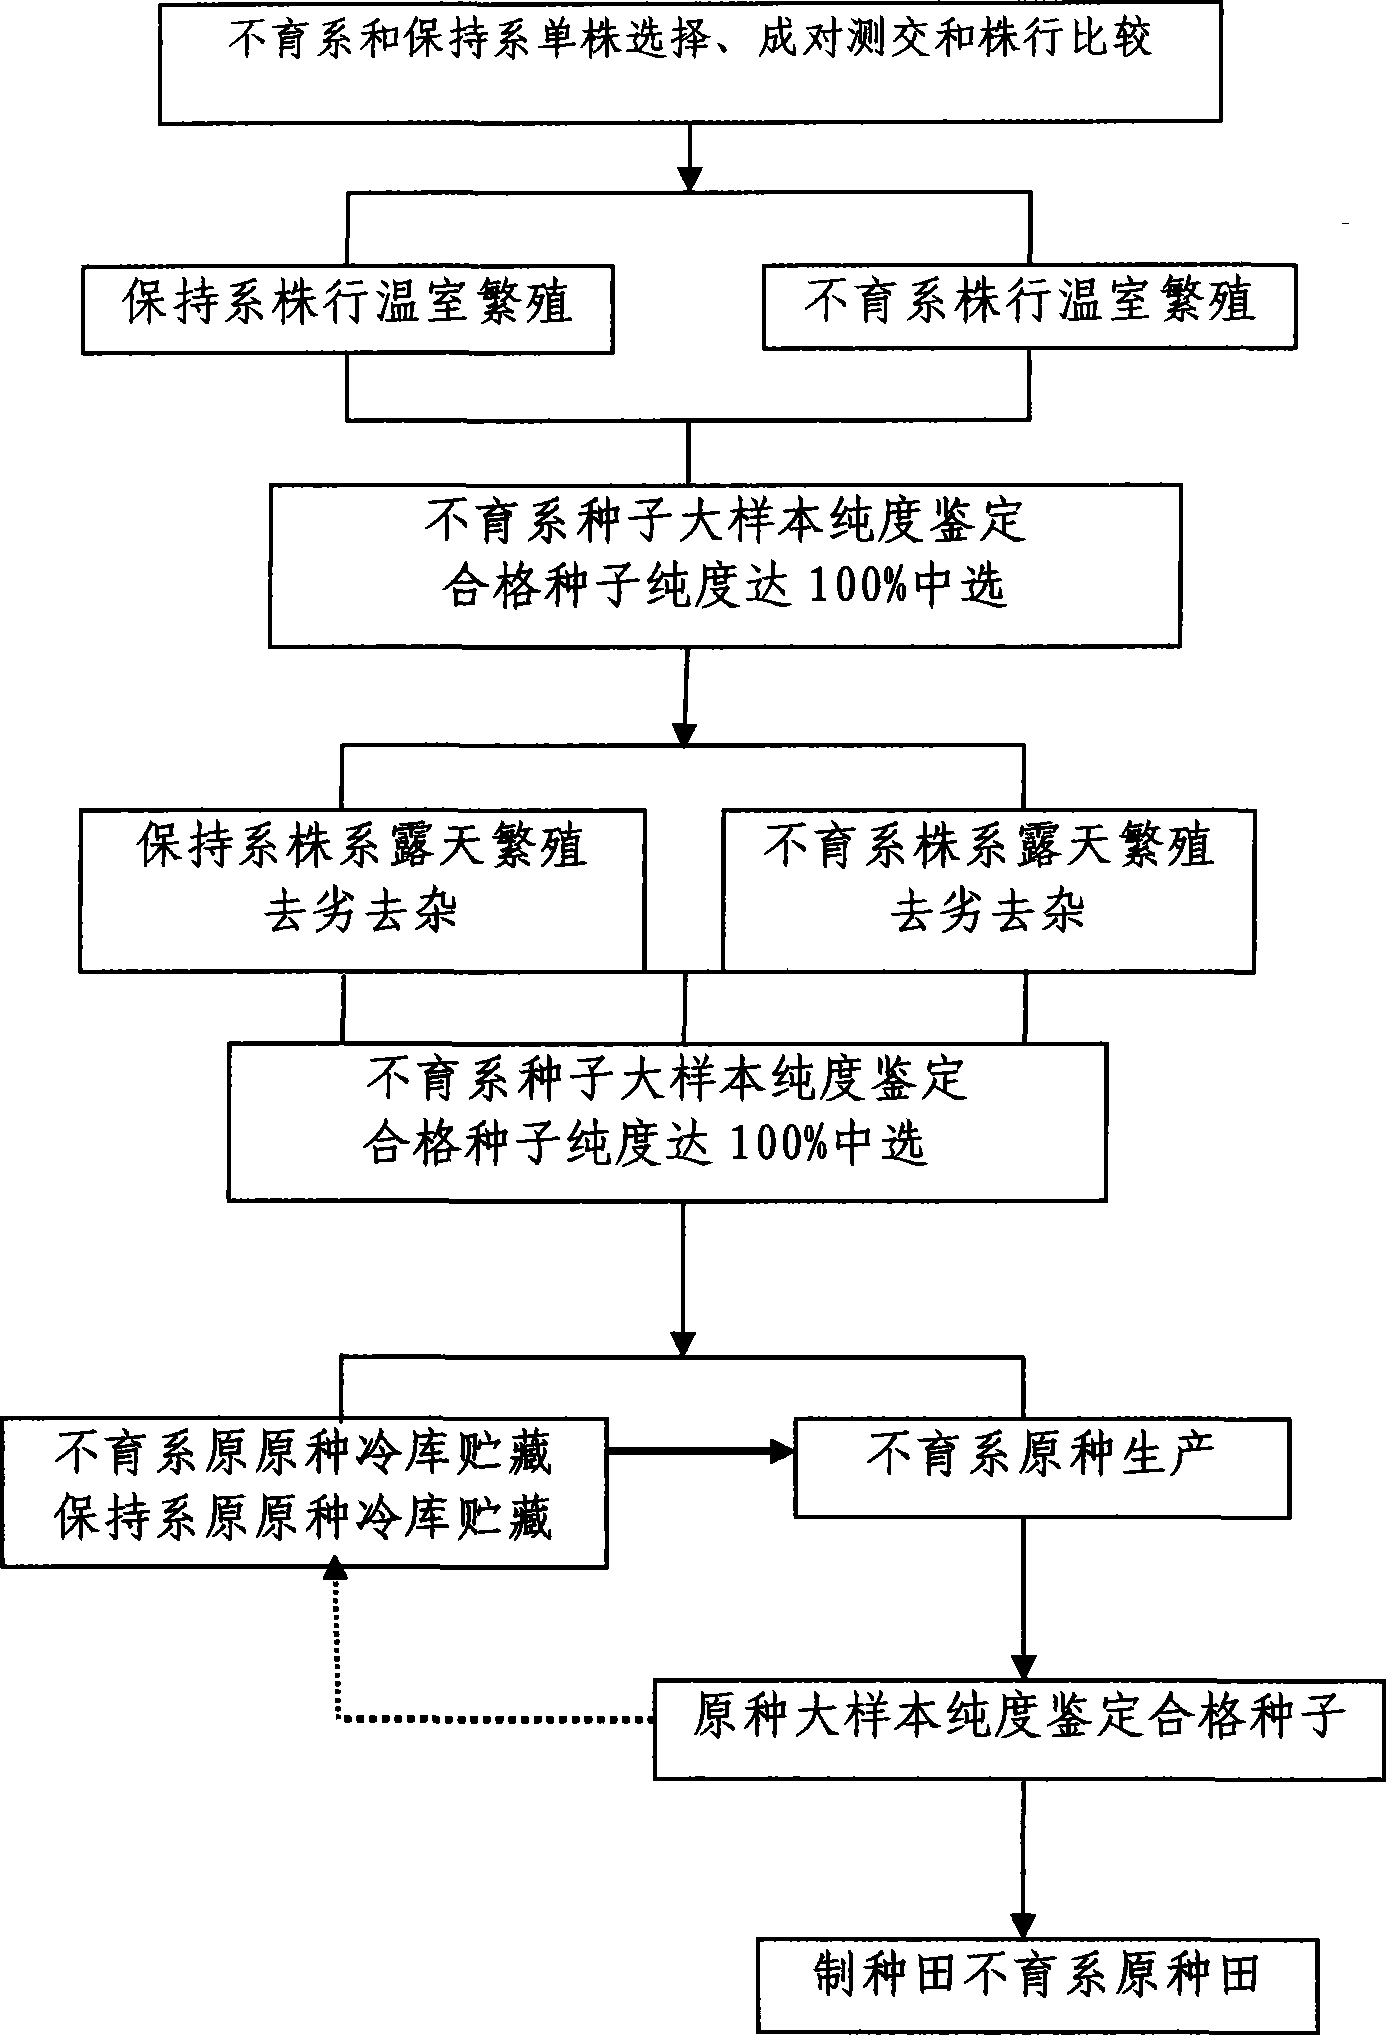 Method for producing original seed for repeat reproduction of japonica rice three-line sterile line strain